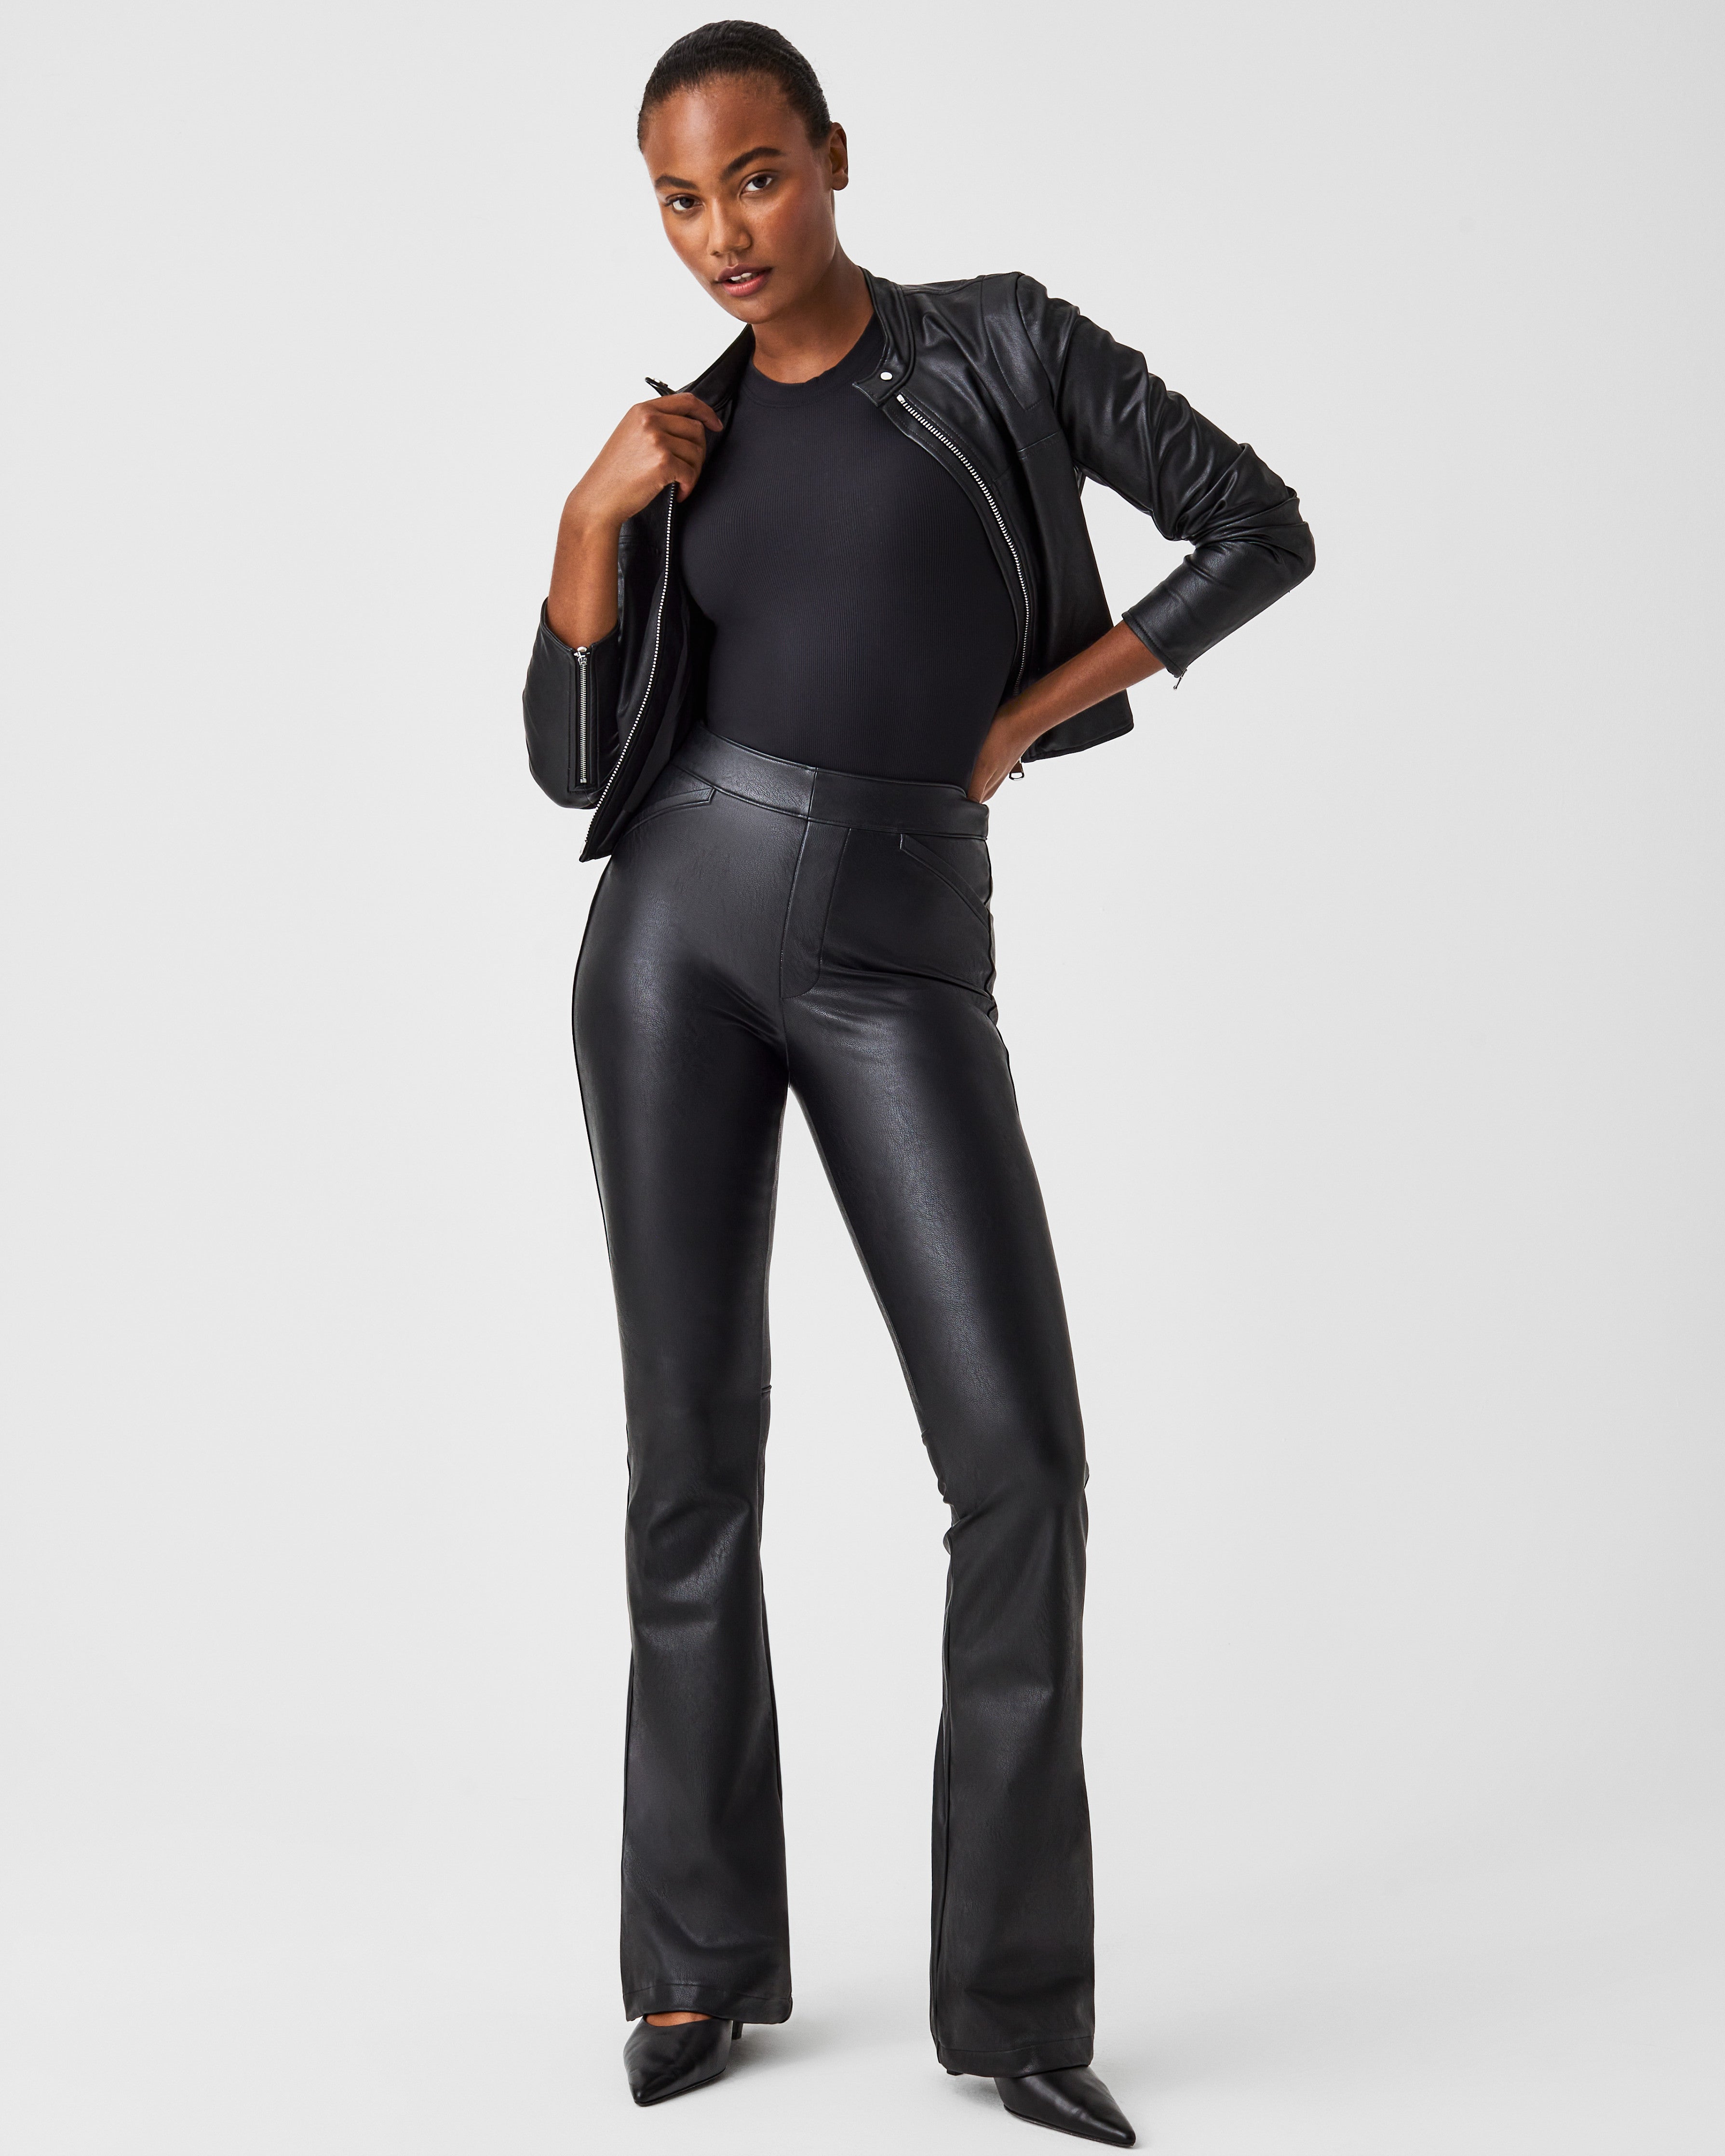 Shop Spanx Women's Leather Trousers up to 50% Off